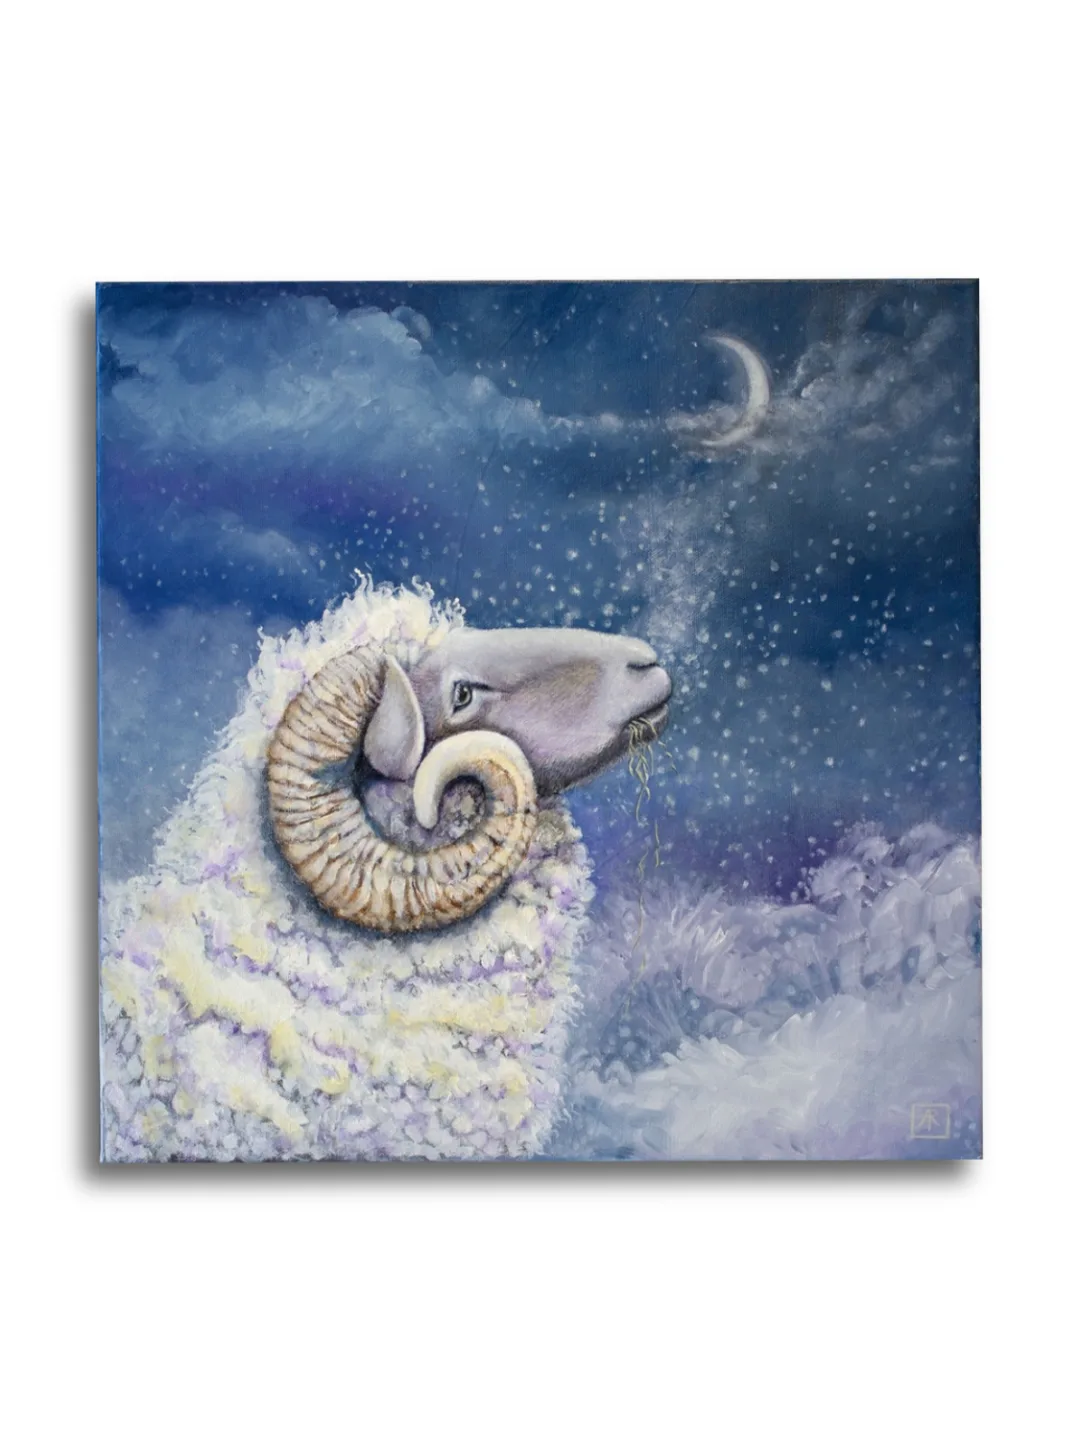 Moongazer by Ann Richmond - A stunning, Original artwork featuring a sheep staring up at the night sky. Painted in the artist's unique style... Framing available.